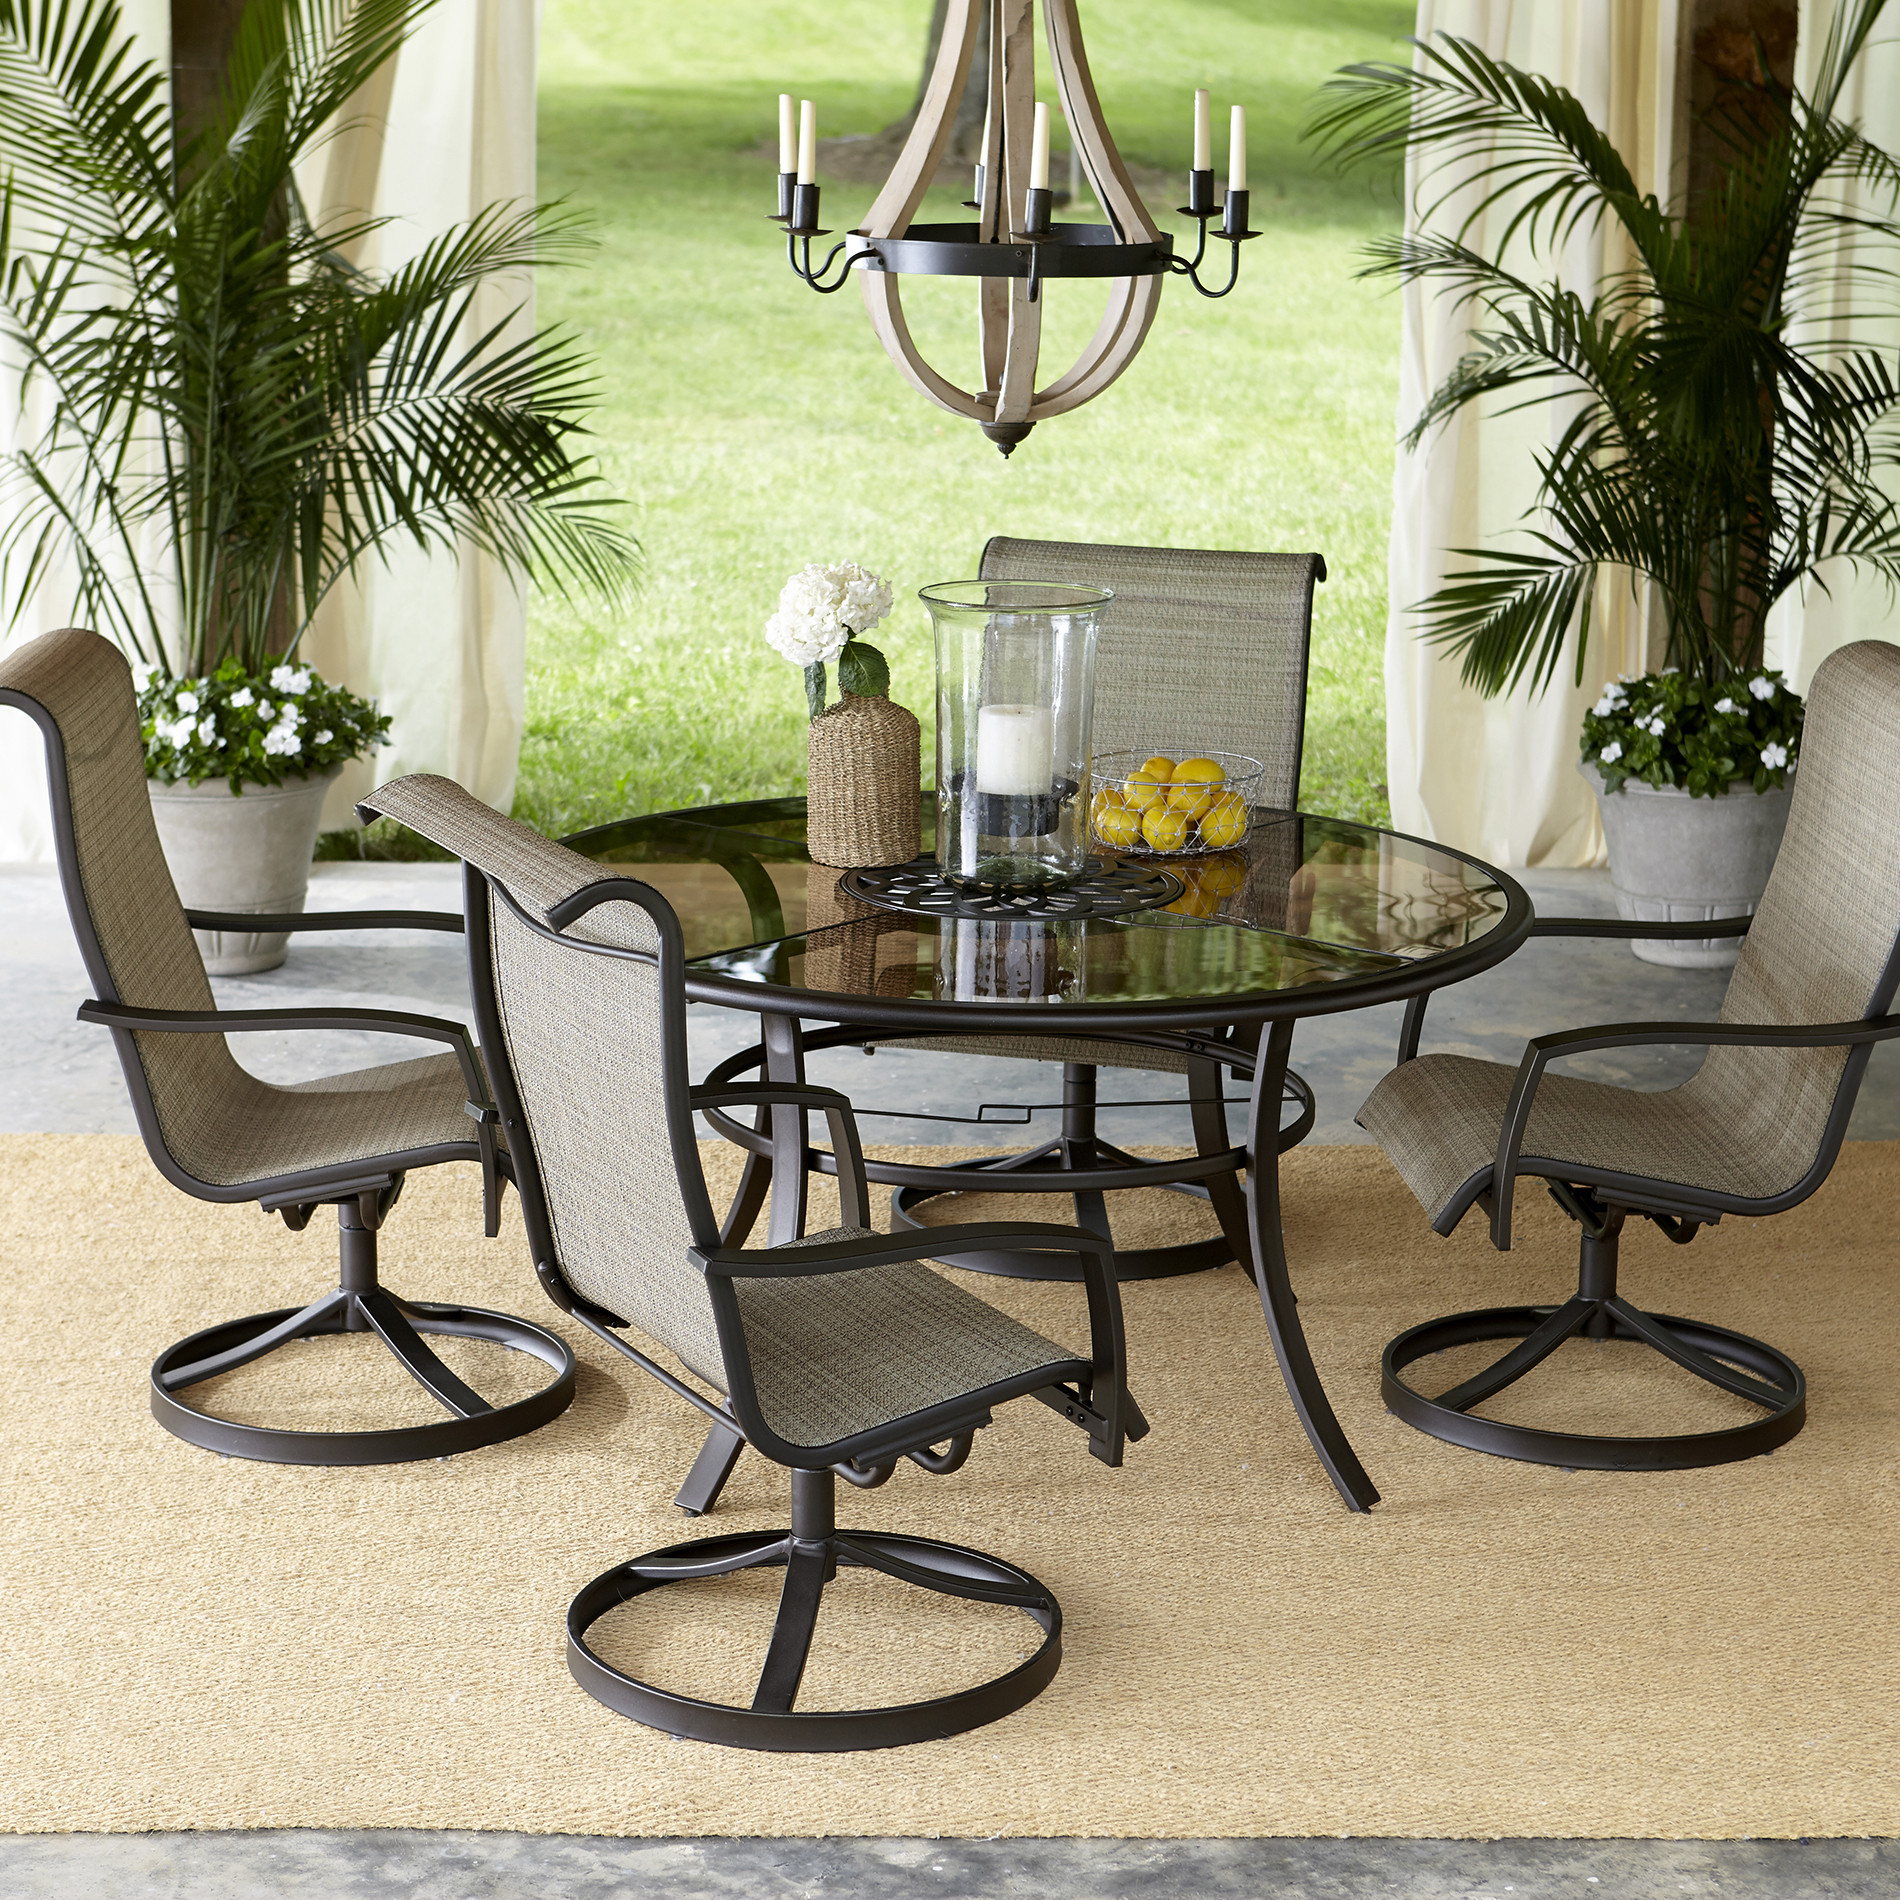 Best ideas about Outdoor Dining Sets
. Save or Pin Garden Oasis Providence 5 Piece Swivel Dining Set Now.